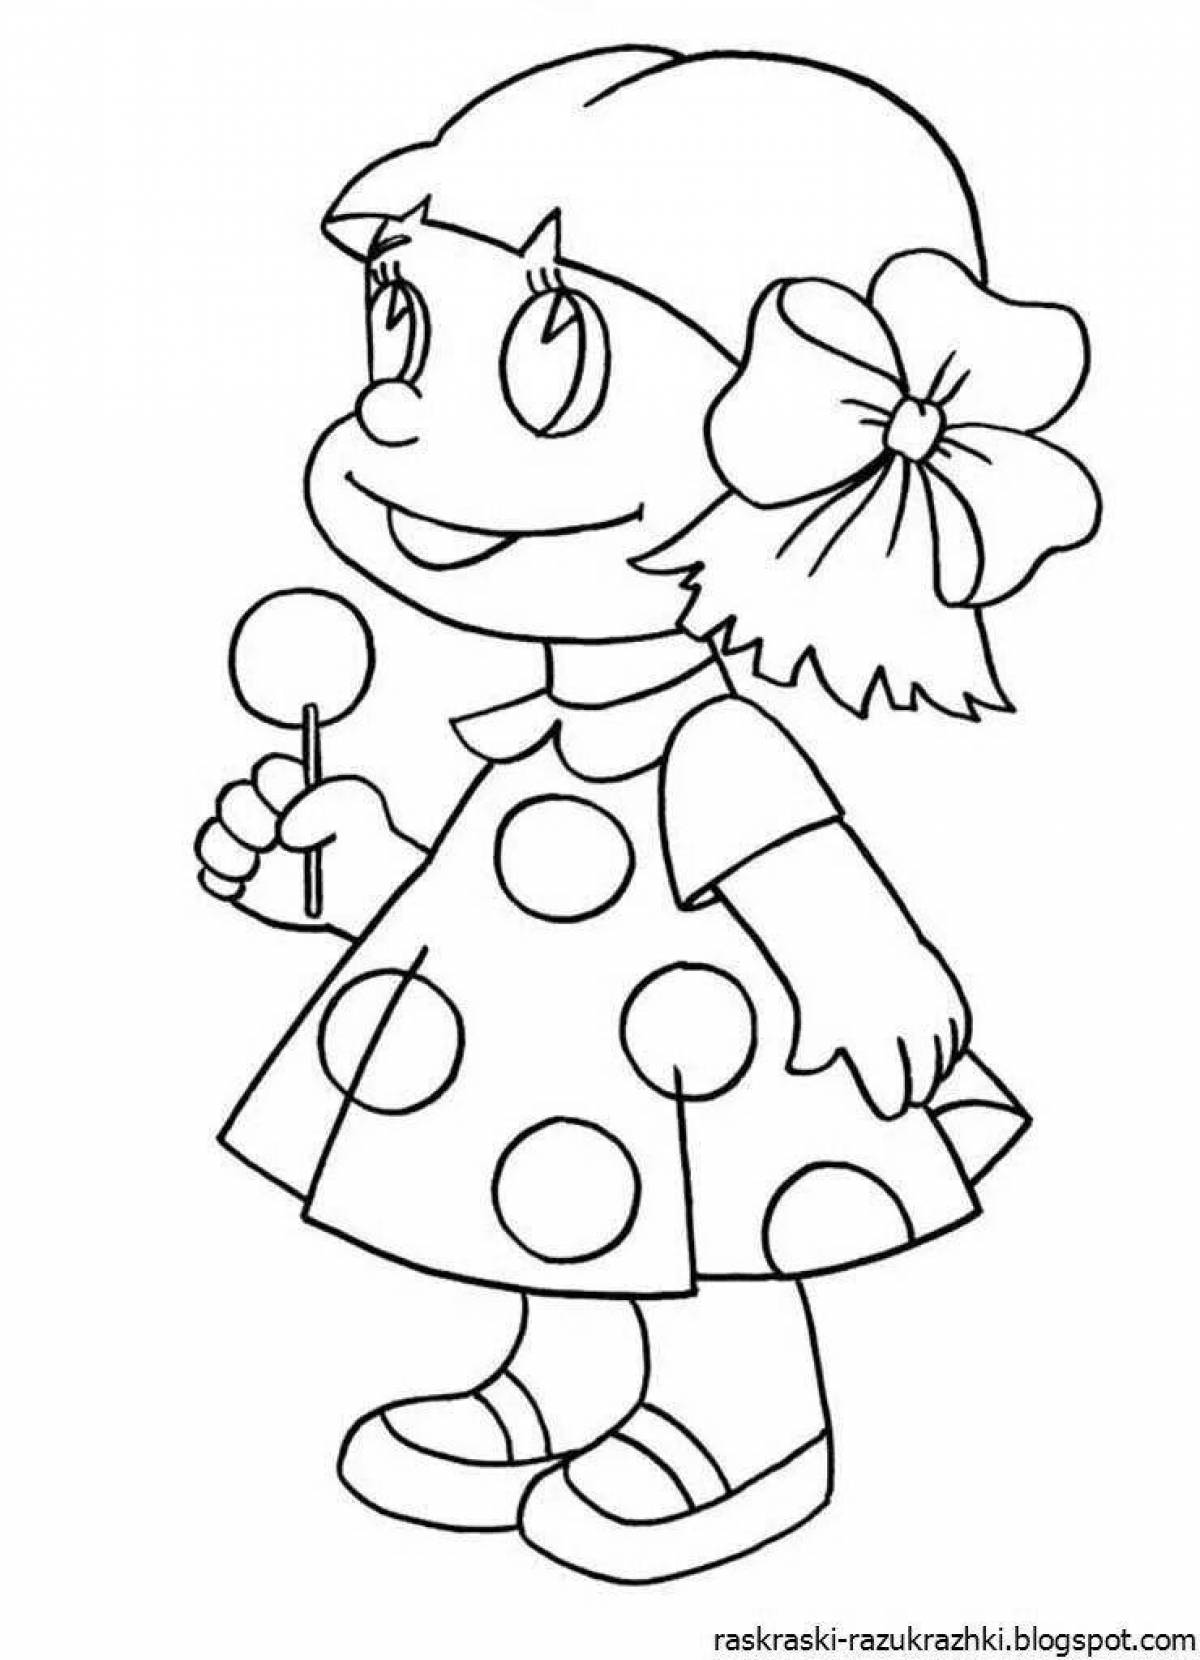 Adorable doll coloring book for 3-4 year olds